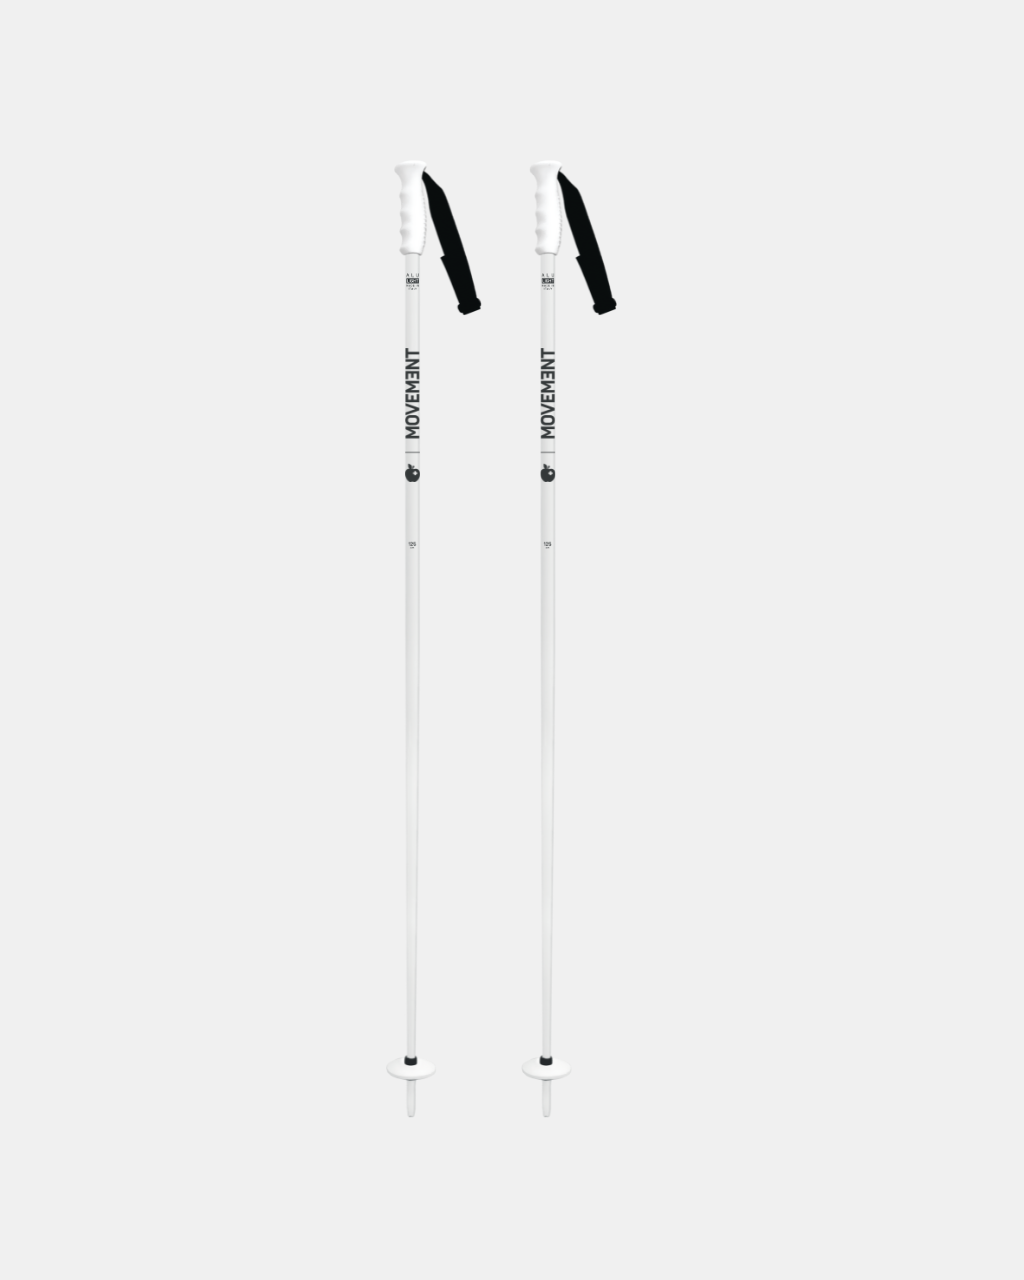 Navigate varying conditions confidently with Movement's white Branded Alu poles.